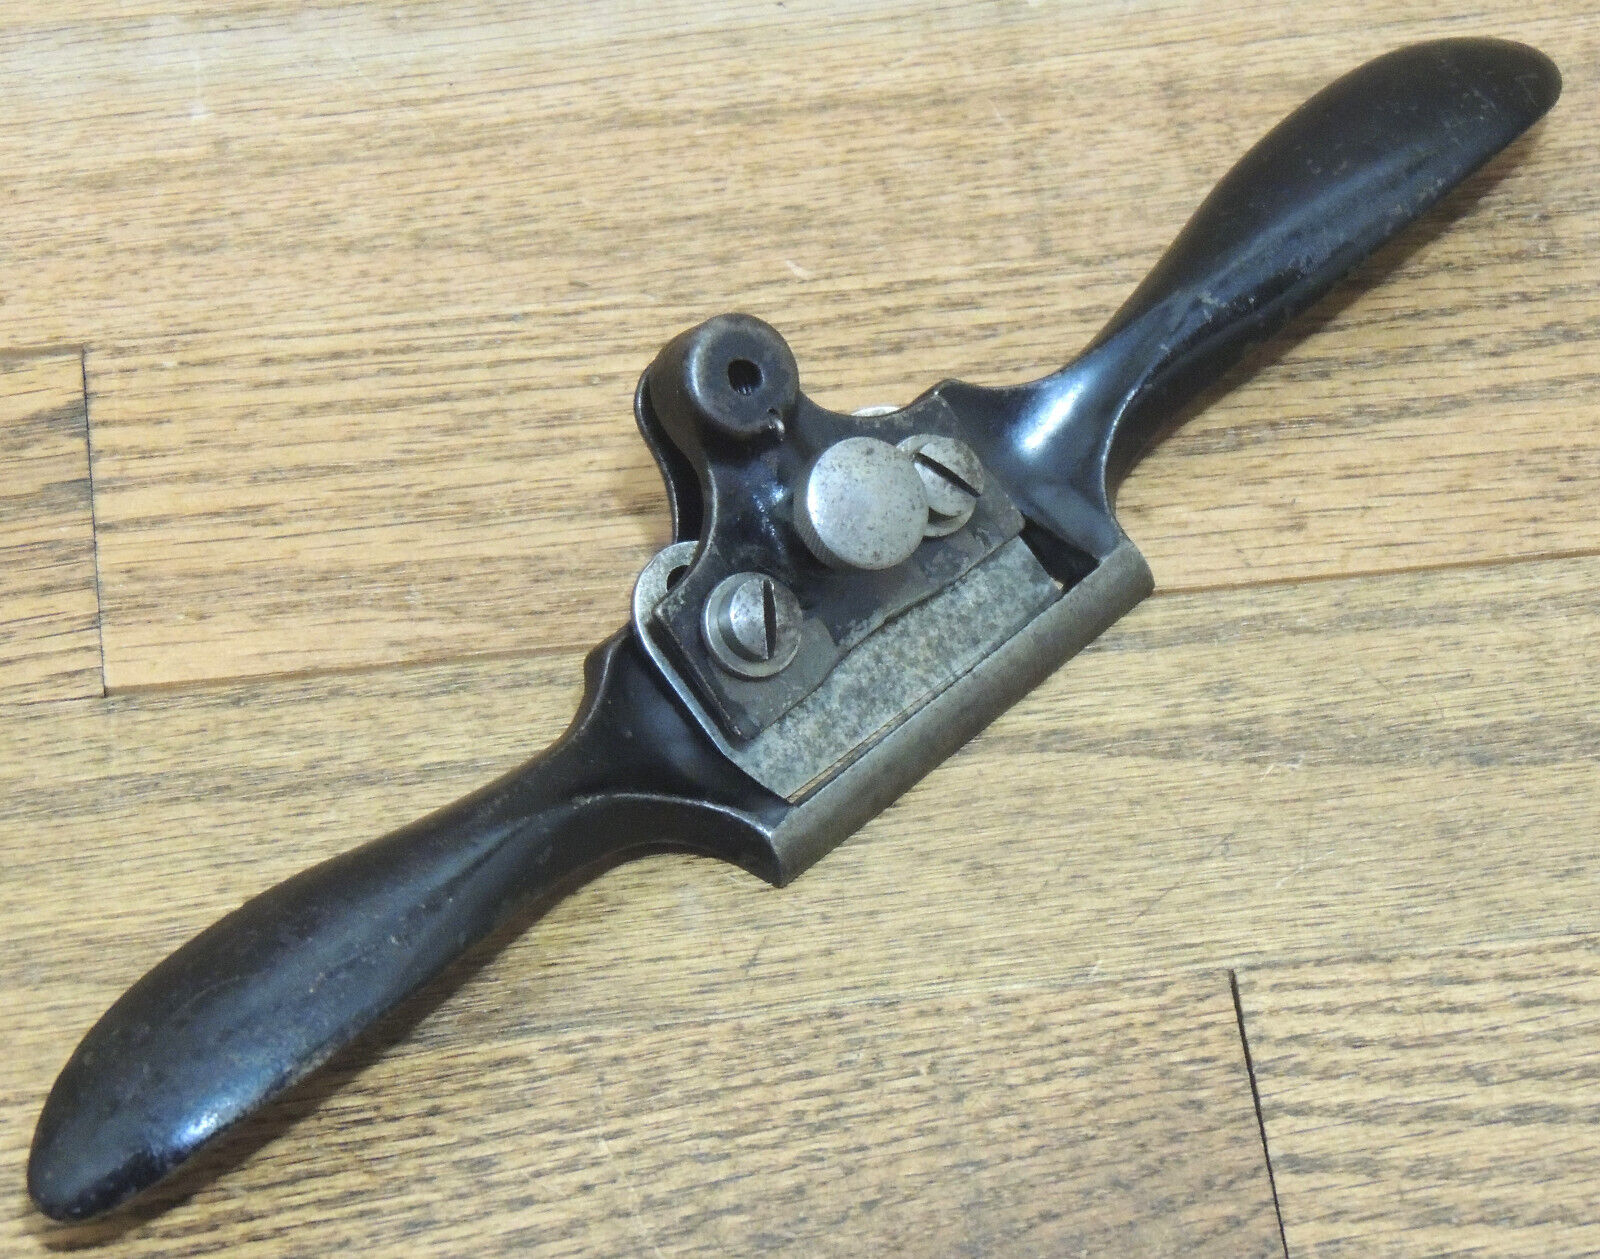 1876 A. A. WOOD & SON Co. ADJUSTABLE SPOKESHAVE-ANTIQUE HAND TOOL-PLANE-SHAVE